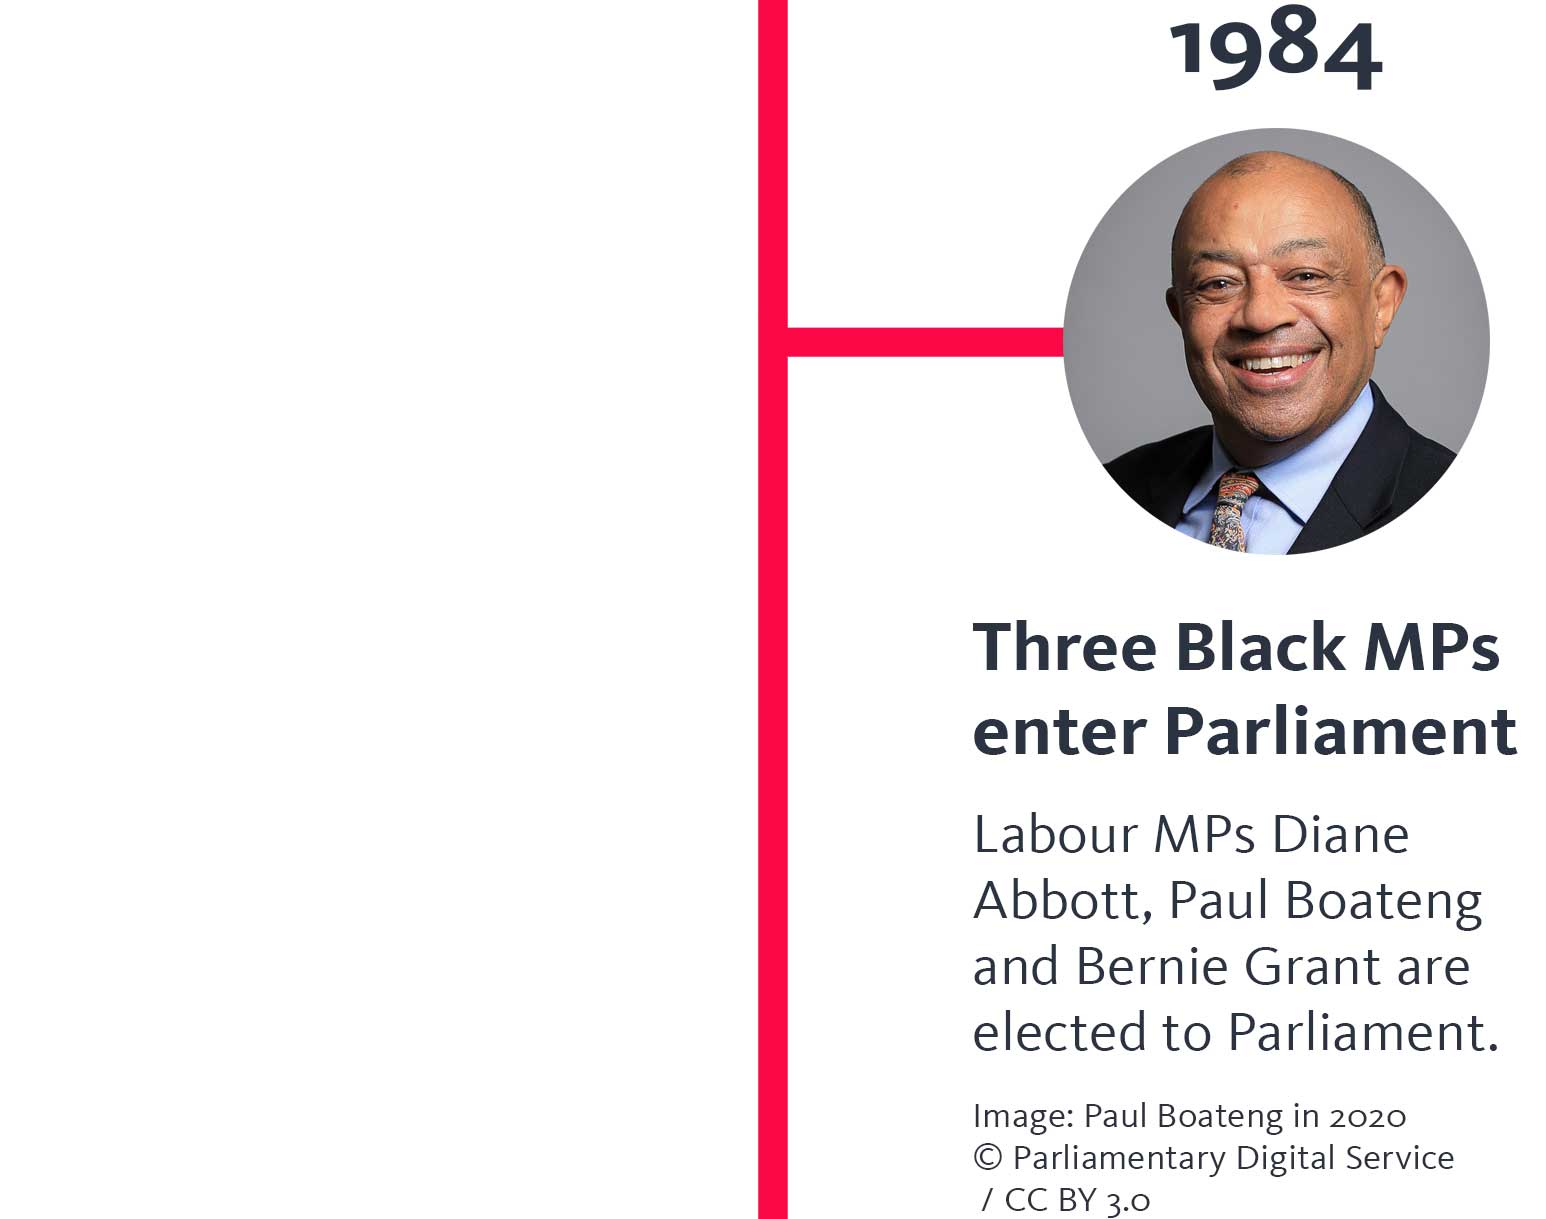 The year '1984' appears above a photograph of Paul Boateng, smiling. A heading below says 'Three Black MPs enter Parliament', and text below that says 'Labour MPs Diane Abbott, Paul Boateng and Bernie Grant are elected to Parliament.' and below that, 'Image: Paul Boateng in 2020 © Parliamentary Digital Service / CC BY 3.0'.